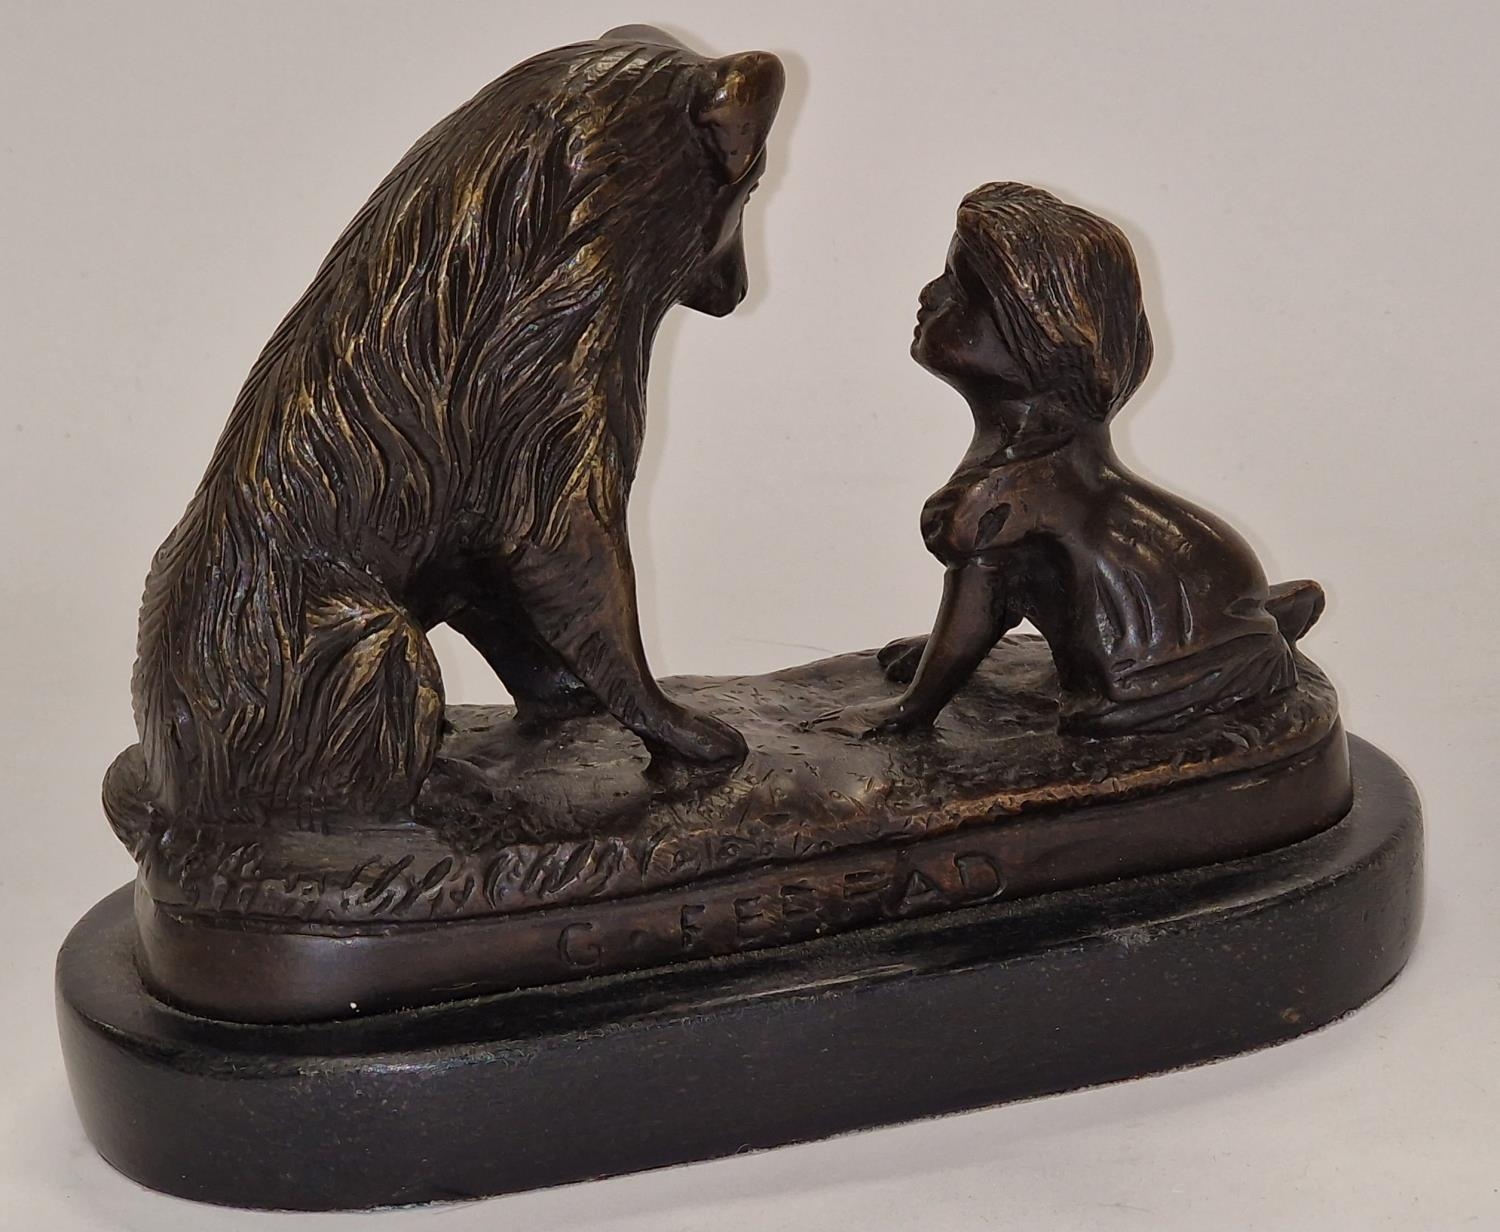 Vintage bronze sculpture "Can't You Talk" on wooden plinth signed G. Ferrad 14cm tall. - Image 2 of 5